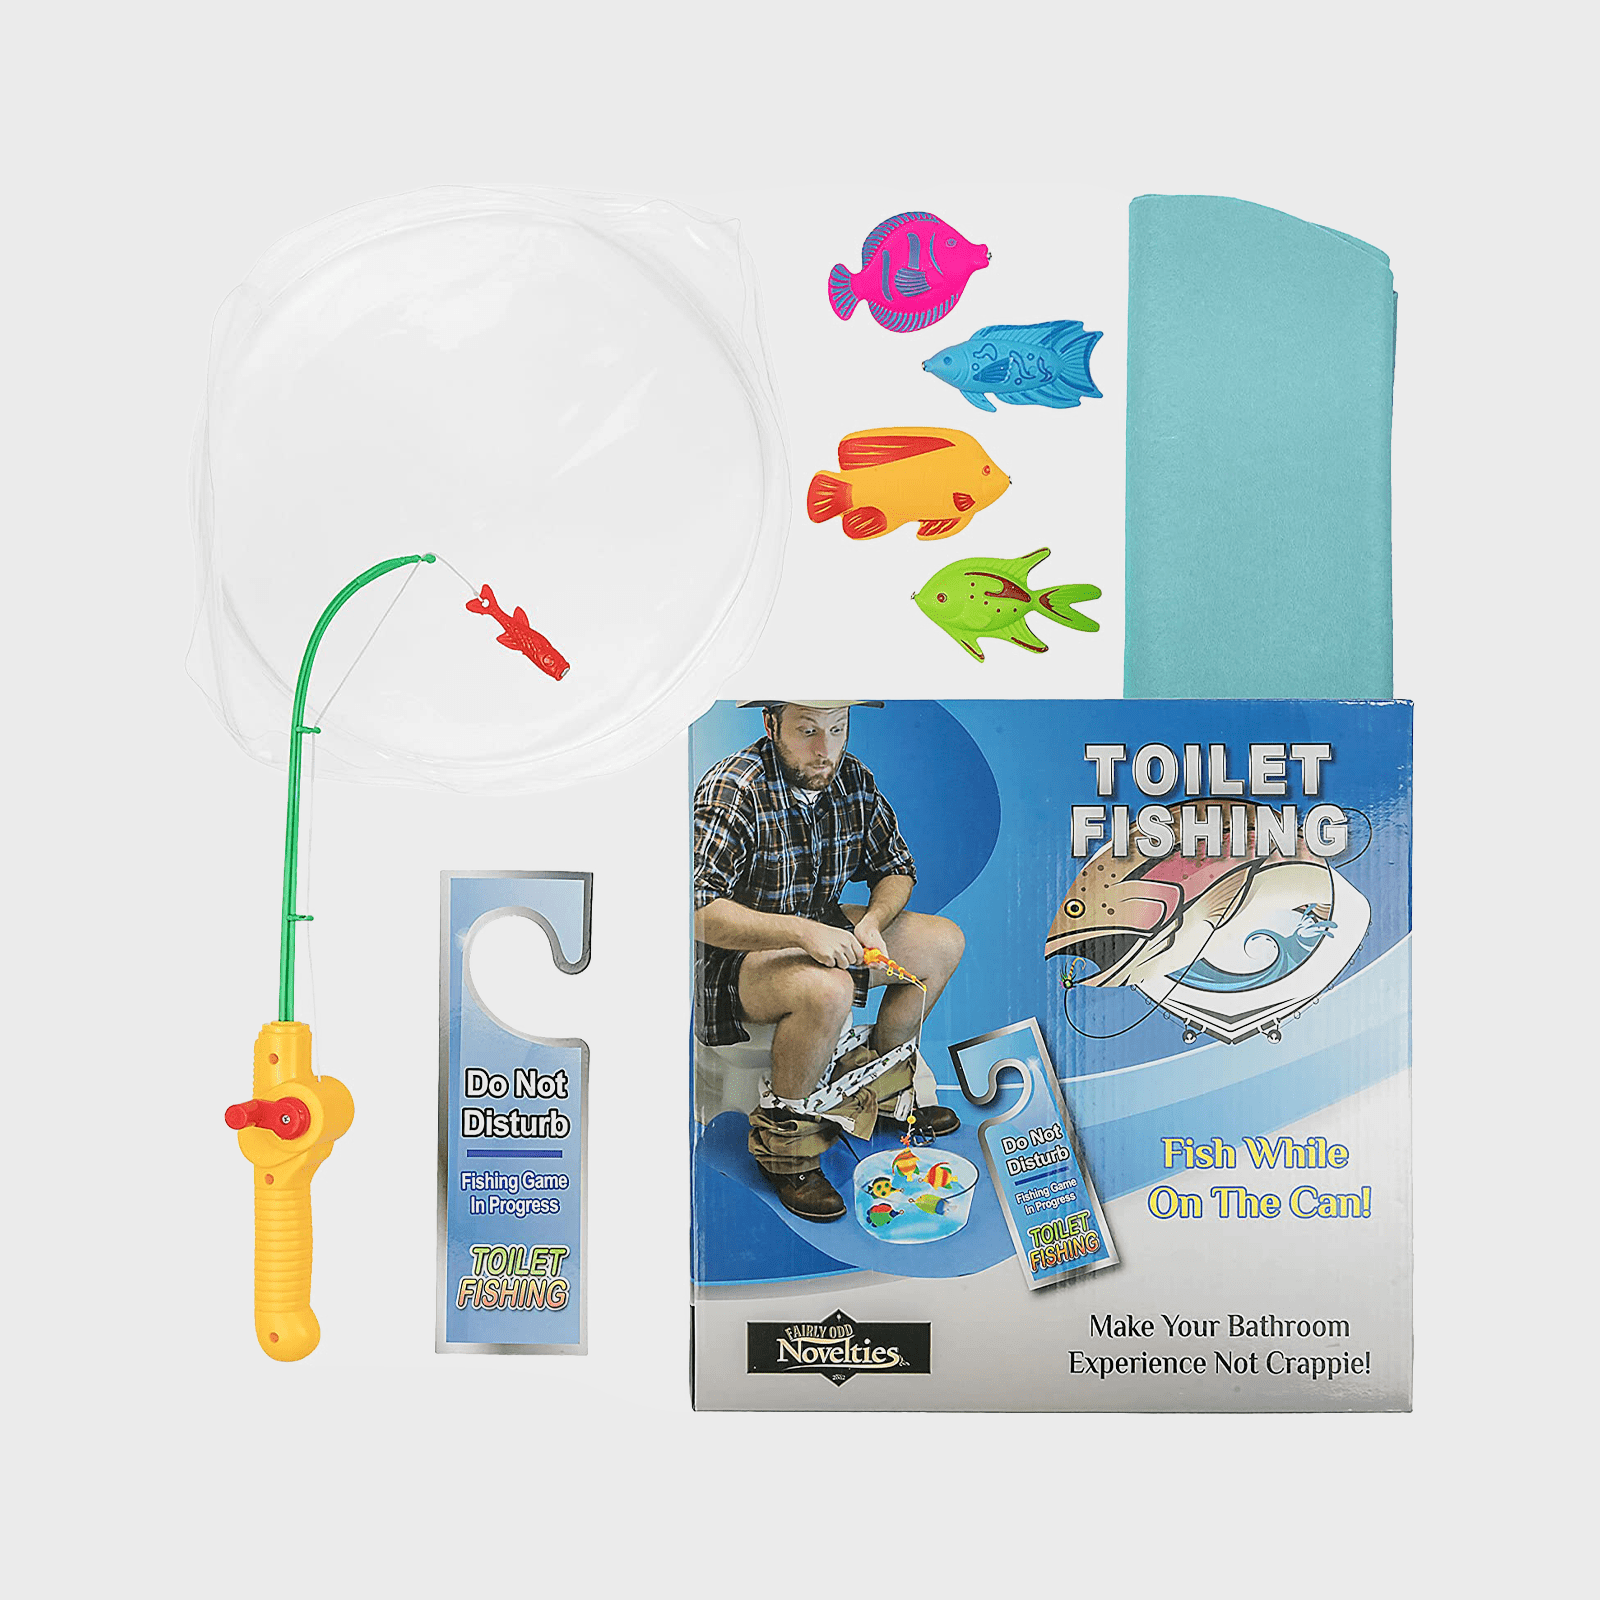 https://www.rd.com/wp-content/uploads/2022/10/potty-fisher-toilet-fishing-game-ecomm-via-amazon.com_.png?fit=700%2C700